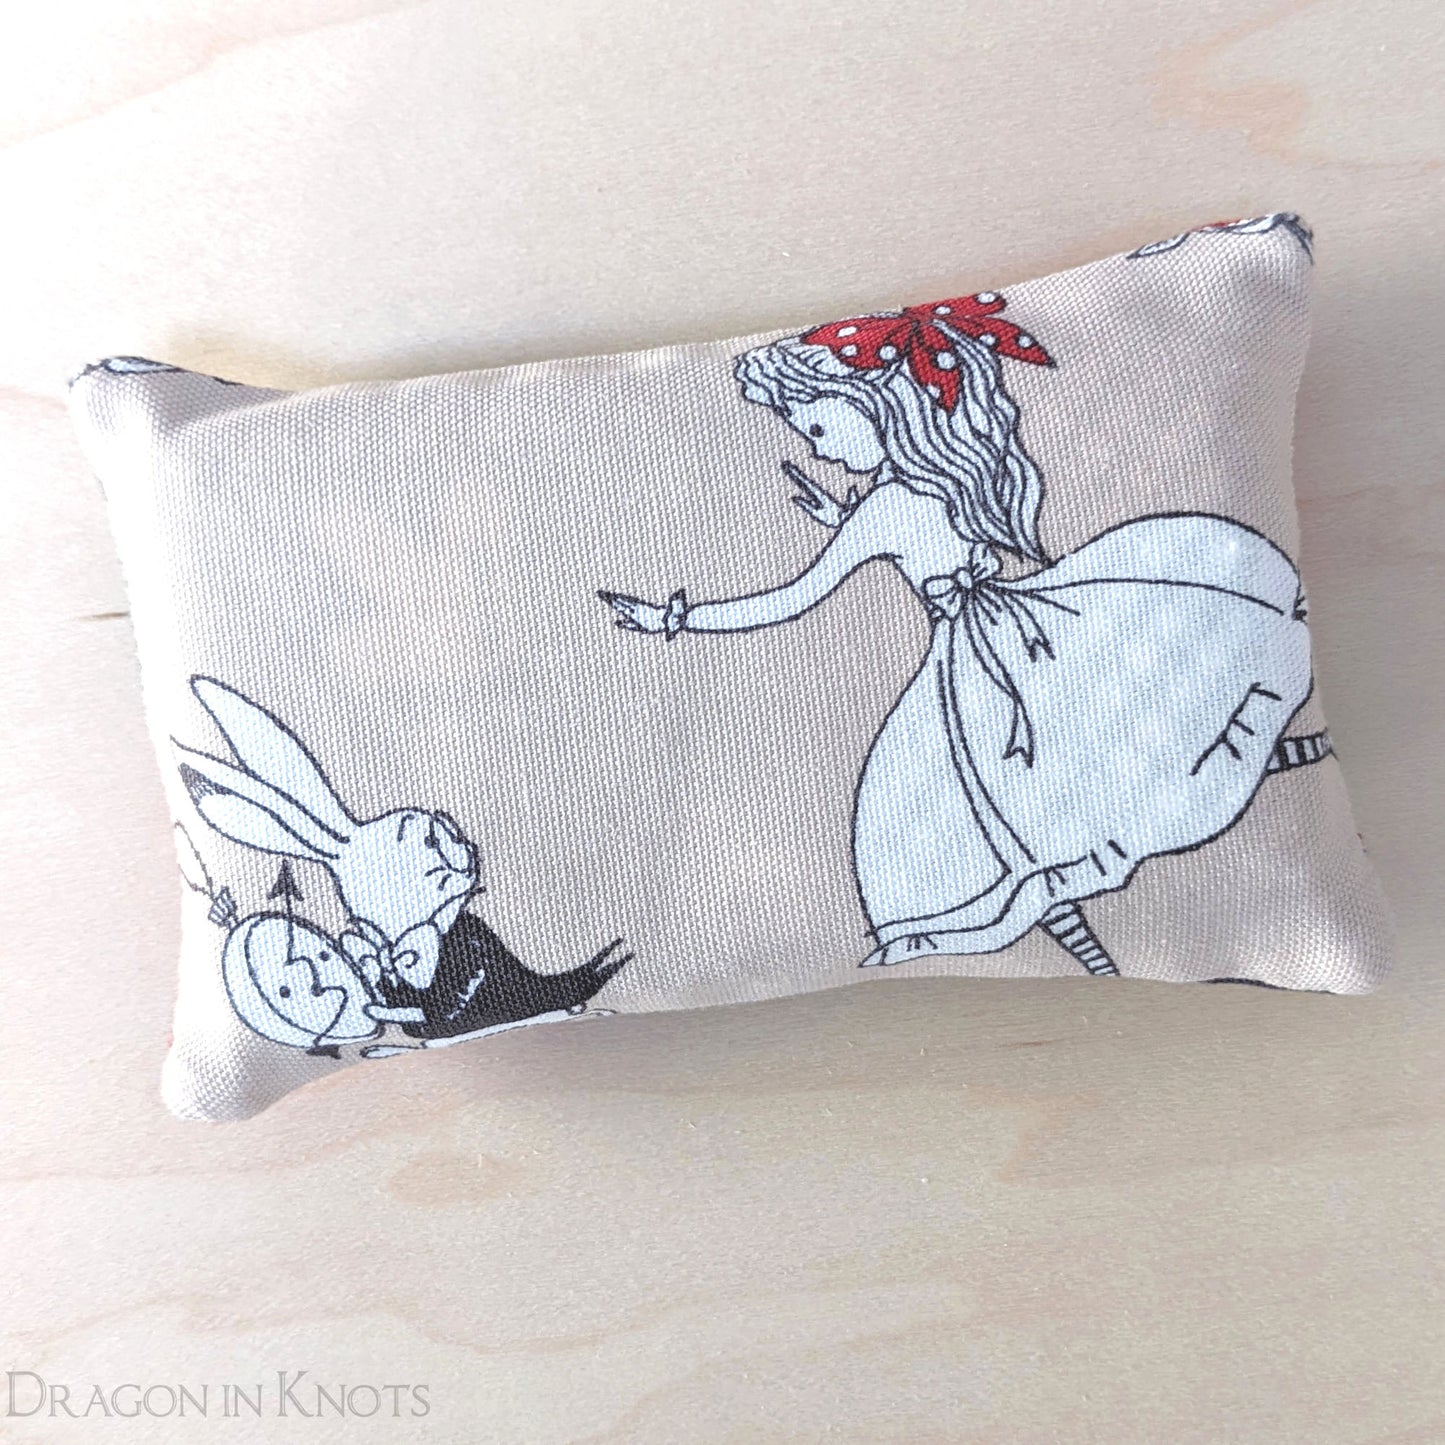 Alice and the Rabbit - To-Go Tissue Holder - Dragon in Knots handmade